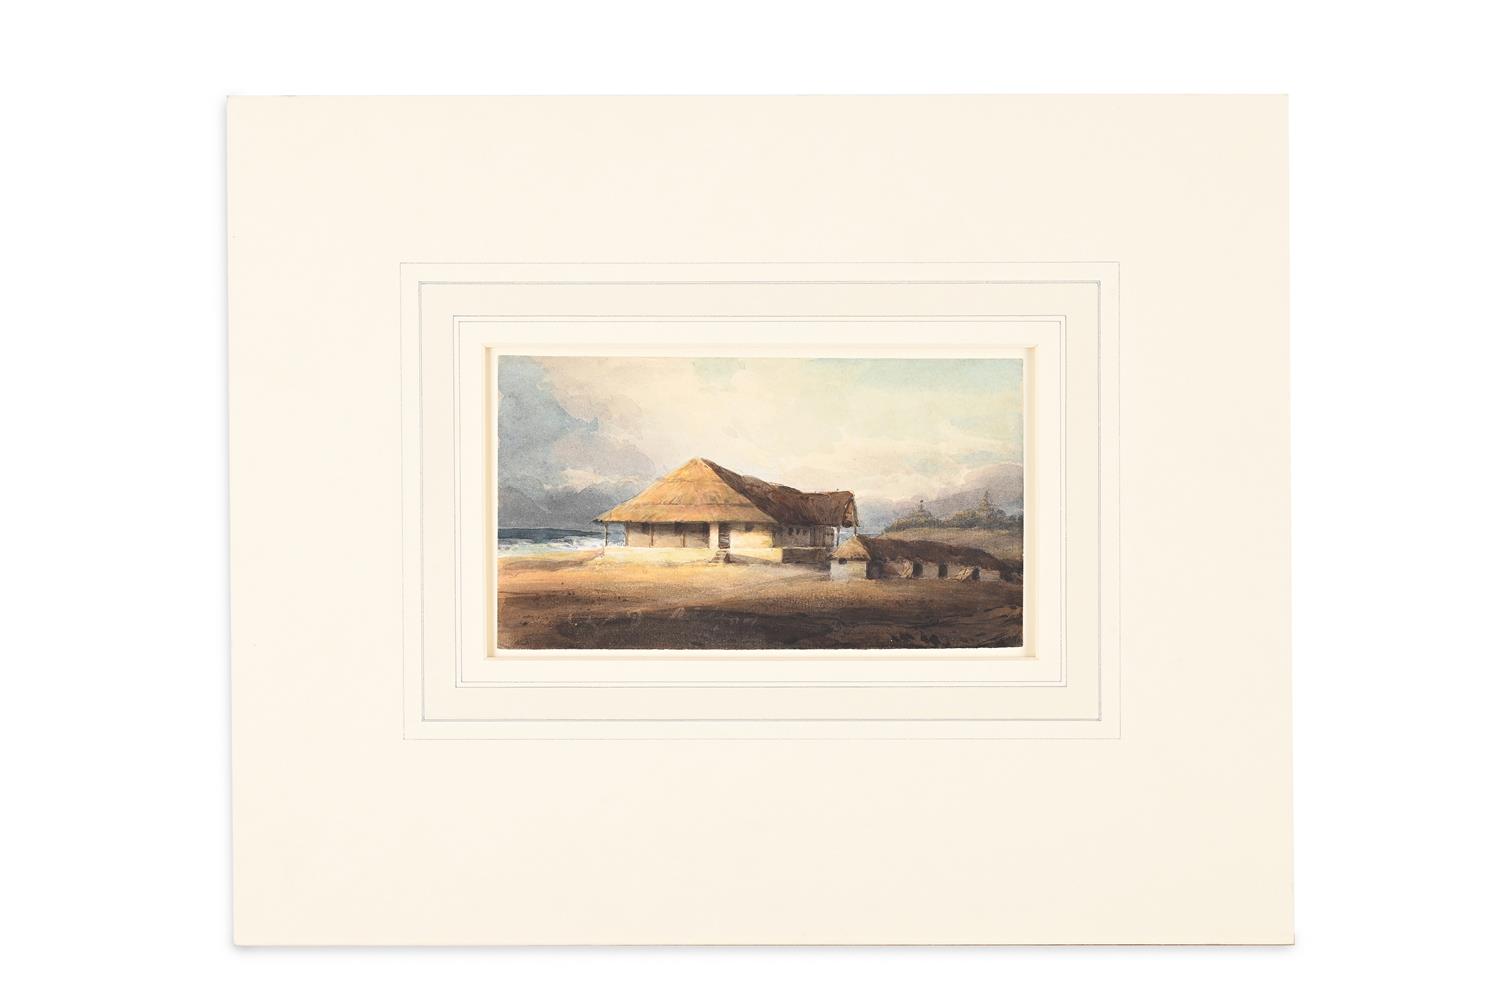 ATTRIBUTED TO CONRAD MARTENS (BRITISH 1801-1878), A SOUTH AFRICAN HOUSE - Image 2 of 2